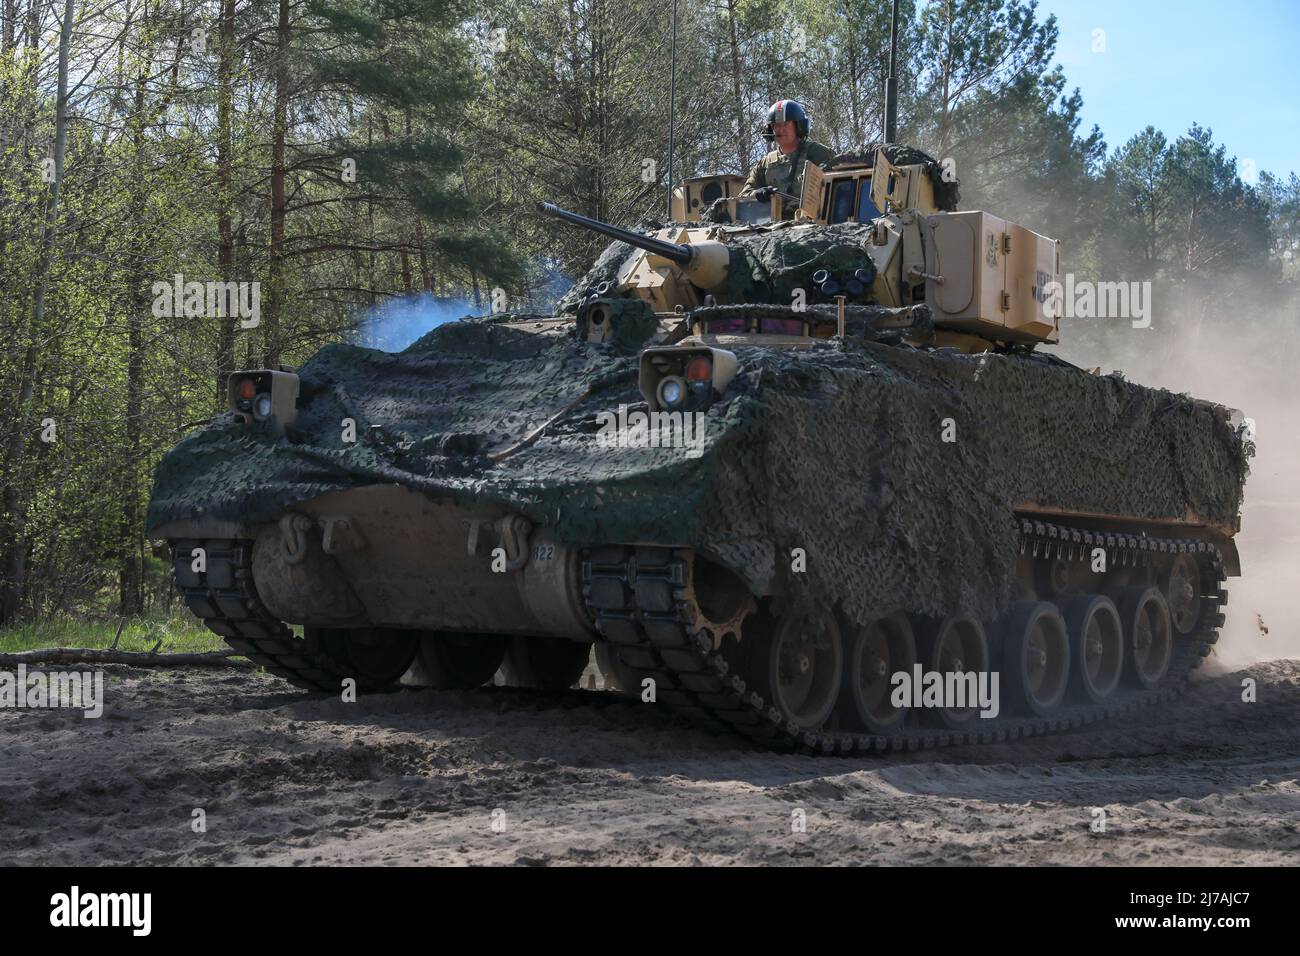 Drawsko Pomorskie, Poland. 29 April, 2022. U.S. Army soldiers assigned to the 3rd Armored Brigade Combat Team, 4th Infantry Division, perform reconnaissance and security in their Stryker Infantry fighting vehicle during a NATO joint training exercise at Drawsko Pomorskie Training Area, April 29, 2022 in Drawsko Pomorskie, Poland.  Credit: Sgt. Andrew Greenwood/U.S Army/Alamy Live News Stock Photo